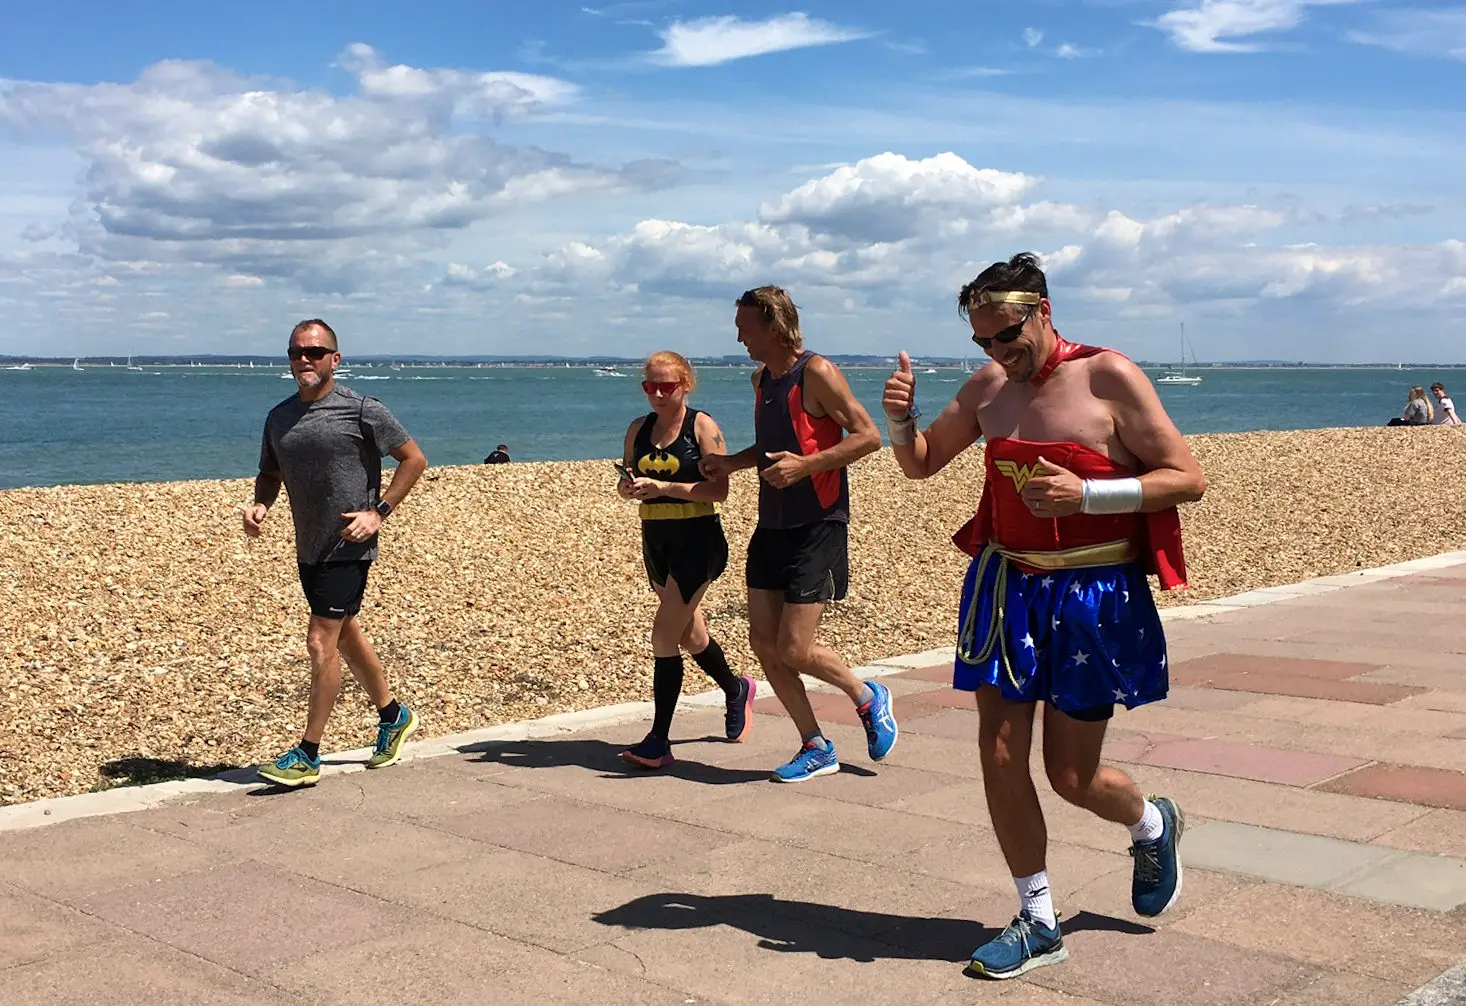 Neil McCall and others running 40th marathon as Wonder Woman